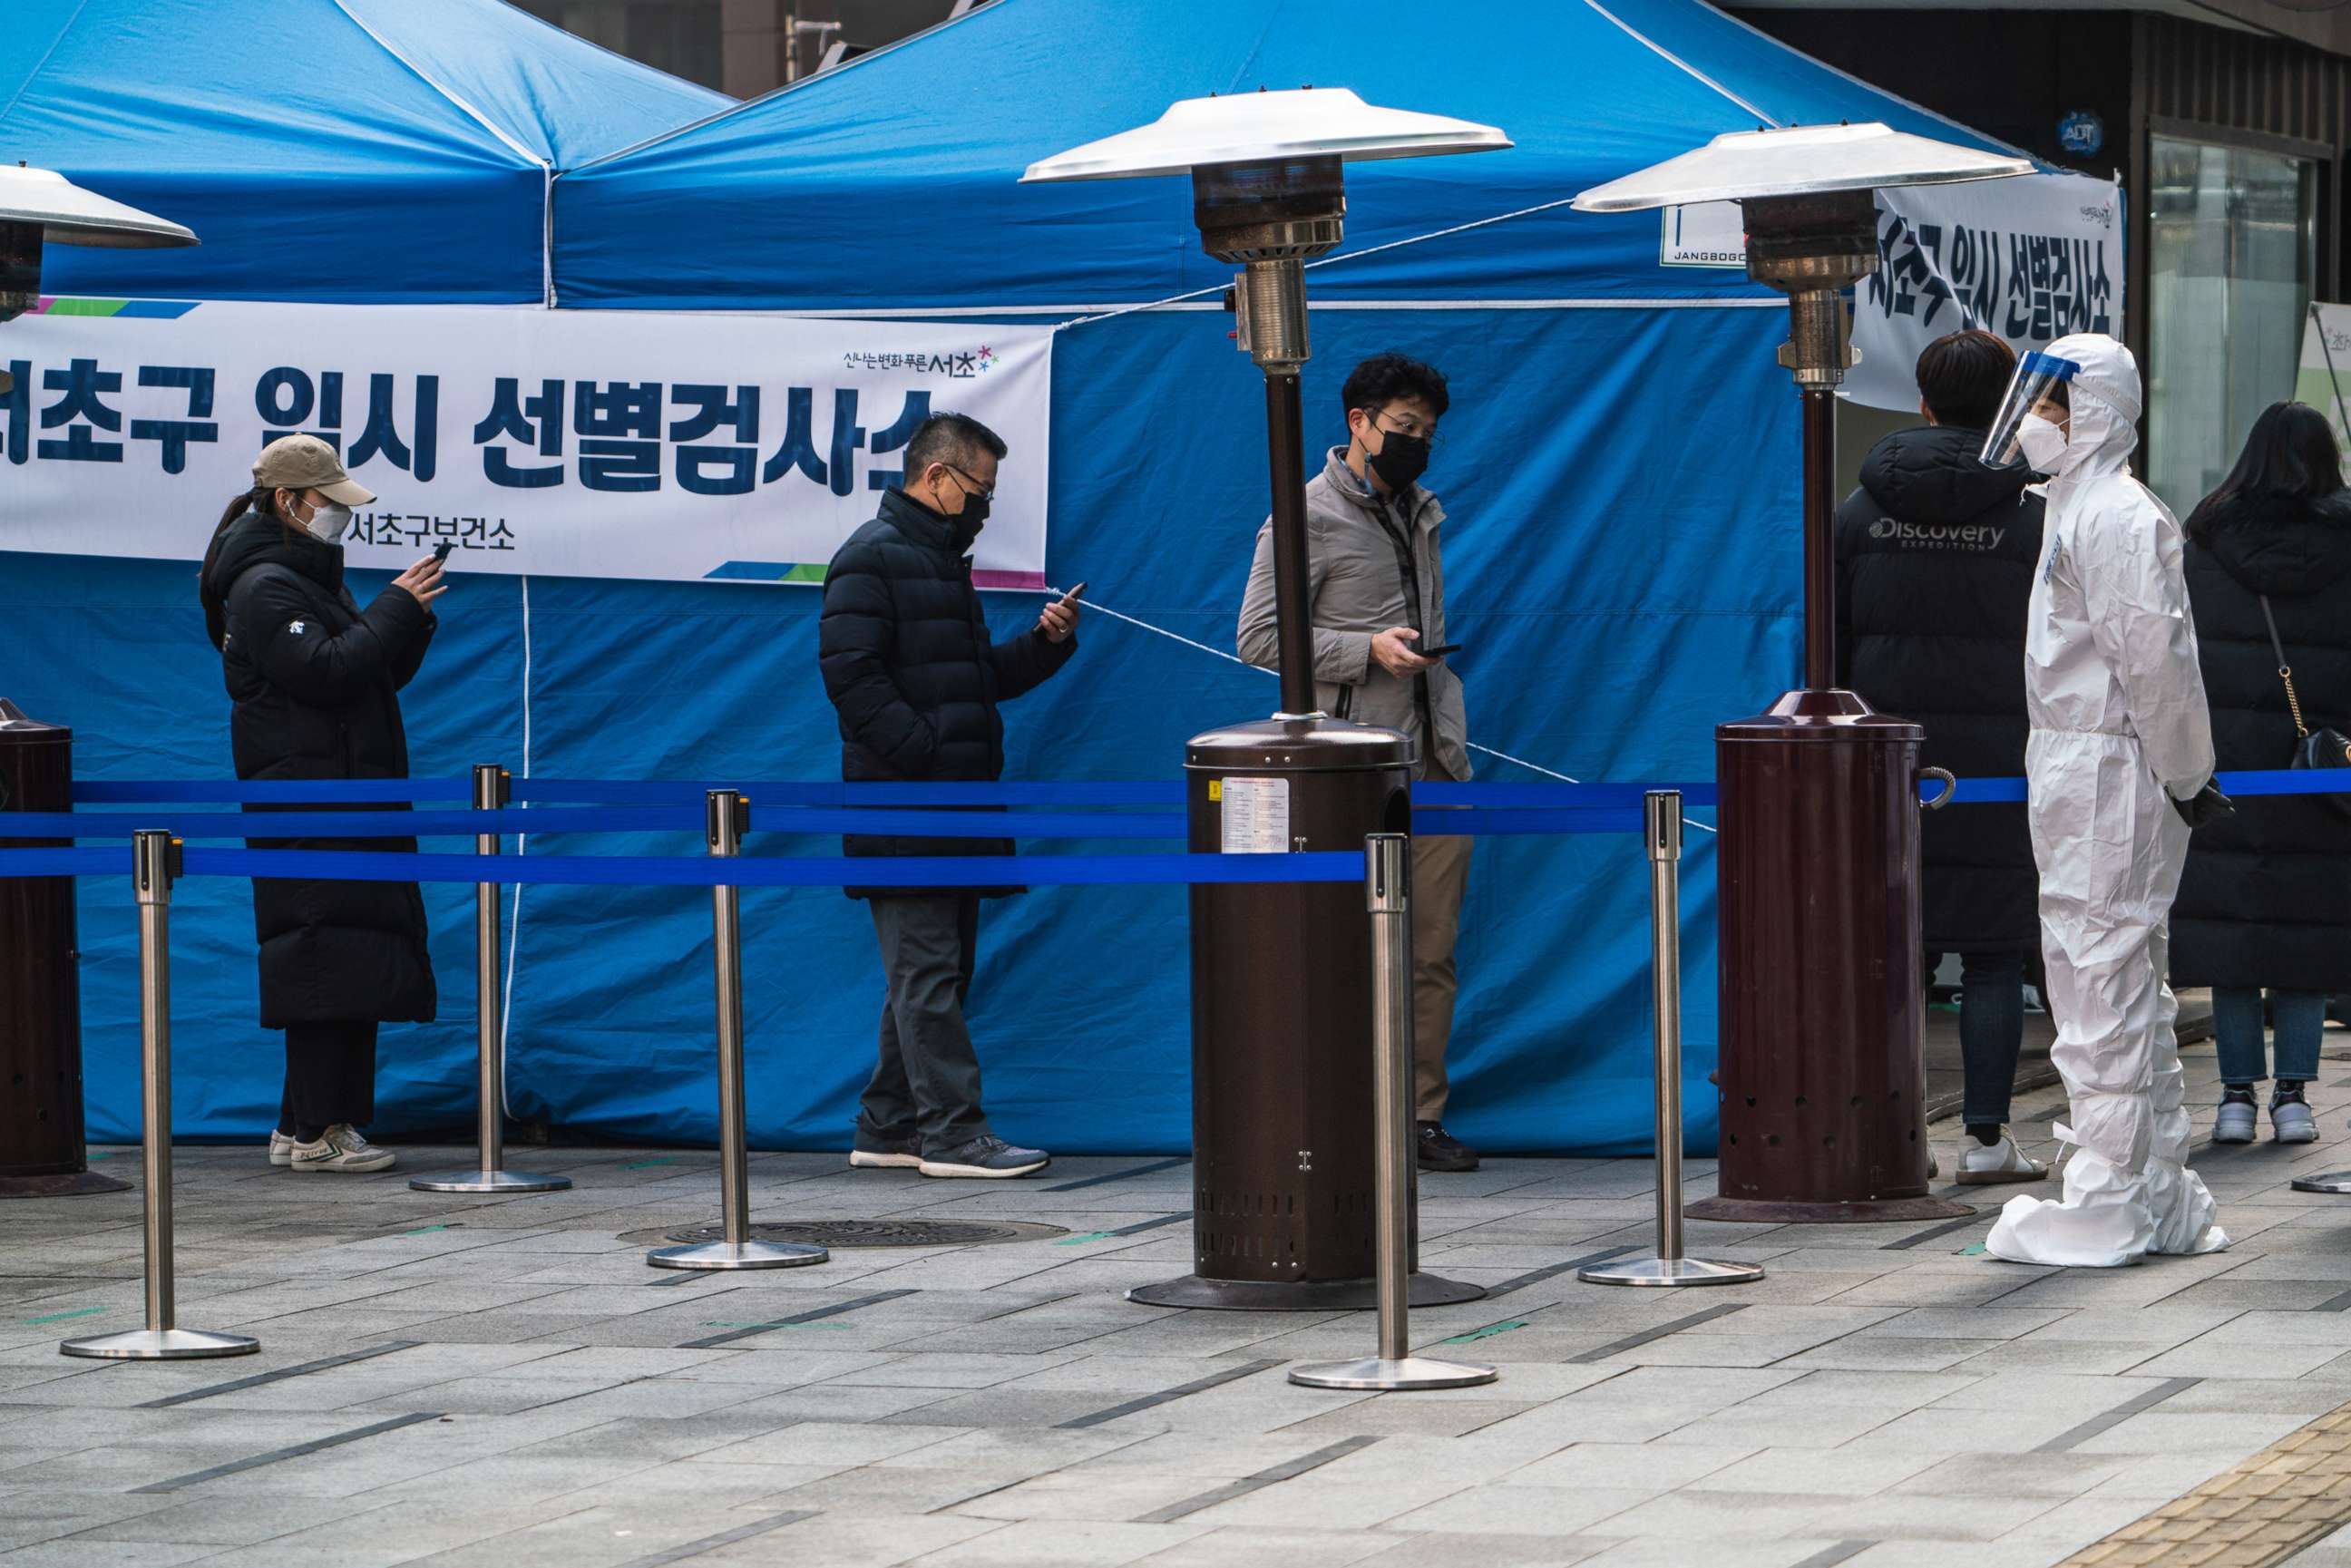 PHOTO: Residents stand in a queue at a temporary COVID-19 testing site in Gangnam Station, Seoul, Dec. 26, 2020.